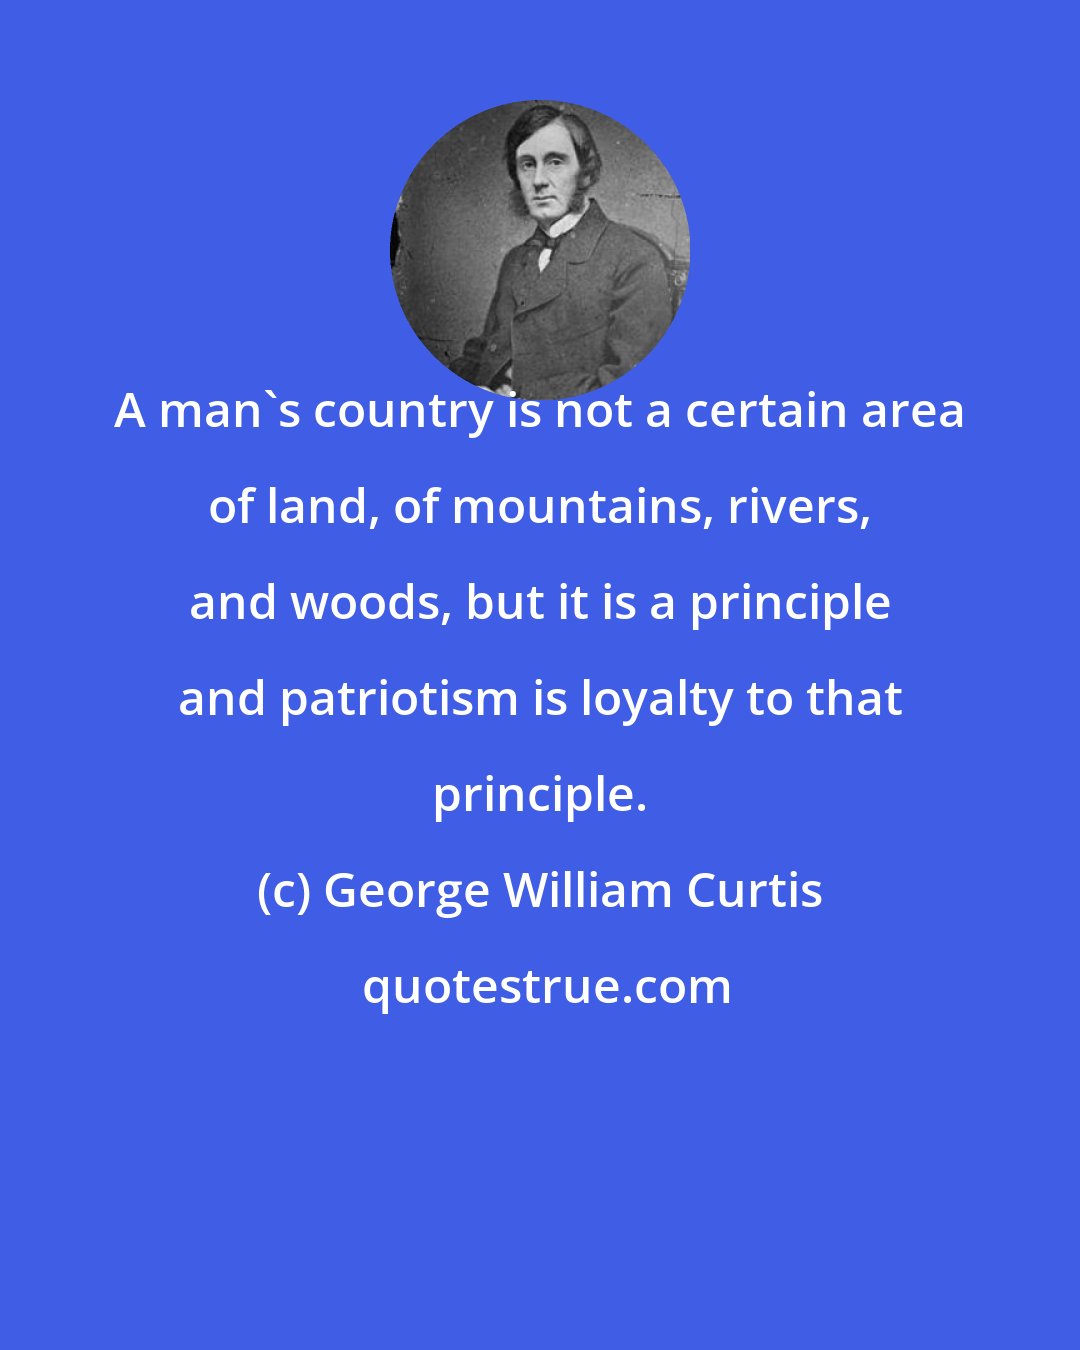 George William Curtis: A man's country is not a certain area of land, of mountains, rivers, and woods, but it is a principle and patriotism is loyalty to that principle.